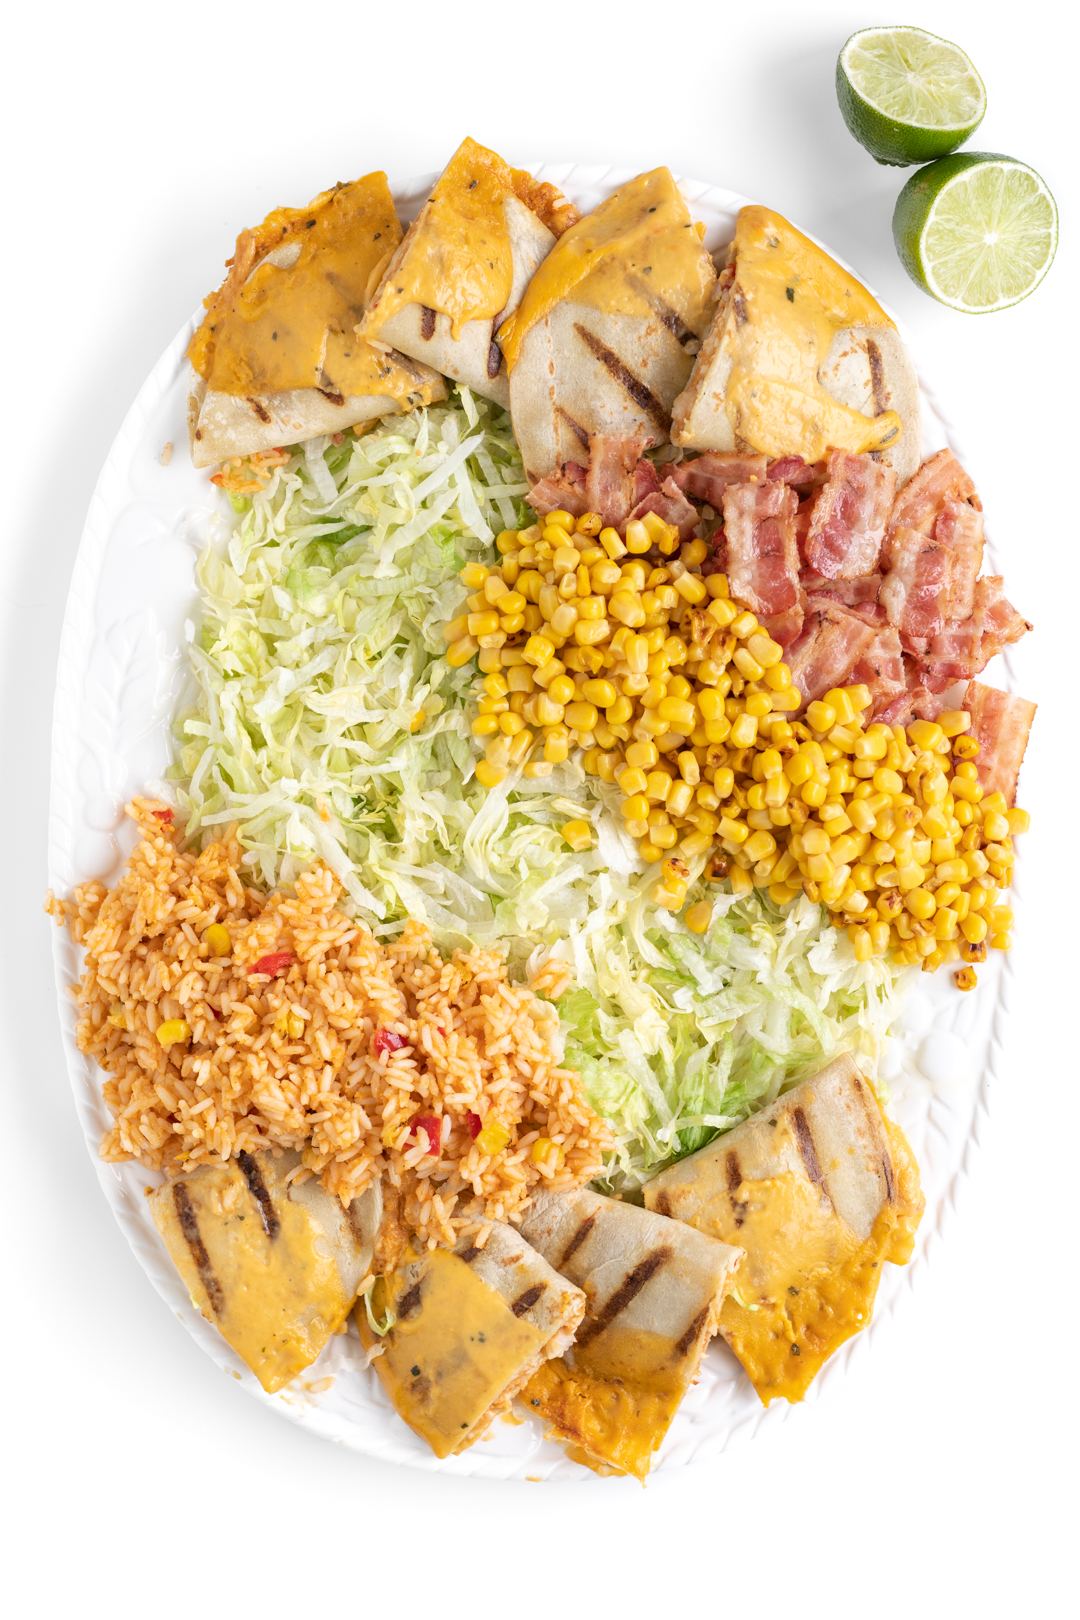 family sized salad being put together on a large tray with shredded lettuce, rice, corn, bacon.